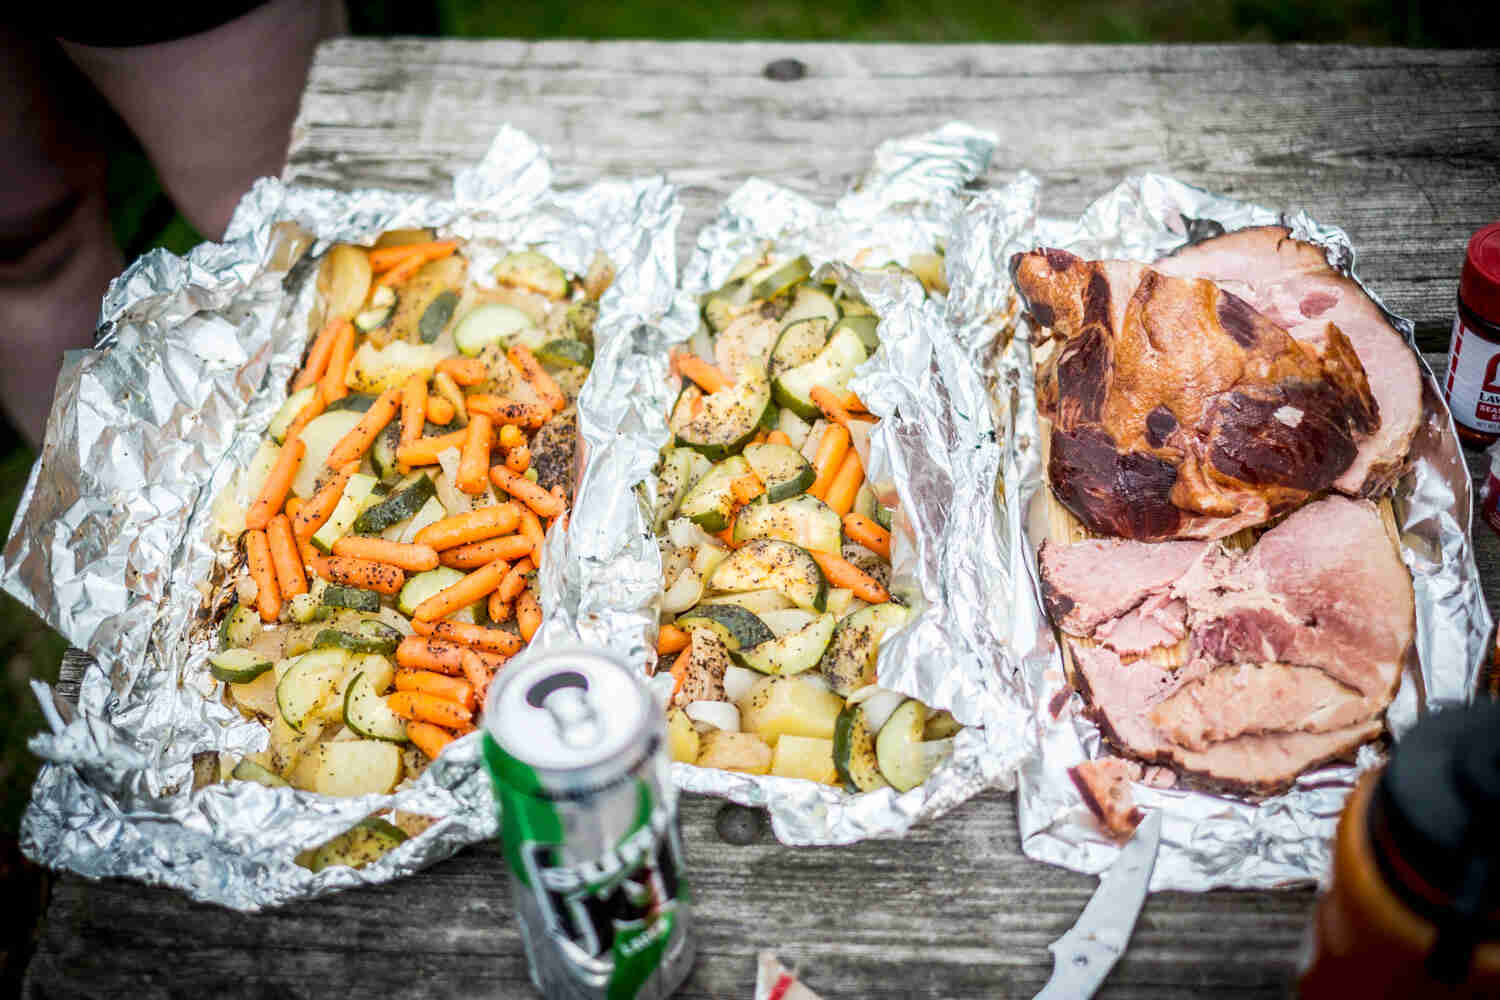 Downward view of 2 sheets of foil with cooked vegetables in them, and a beer can in the forefront, on a table